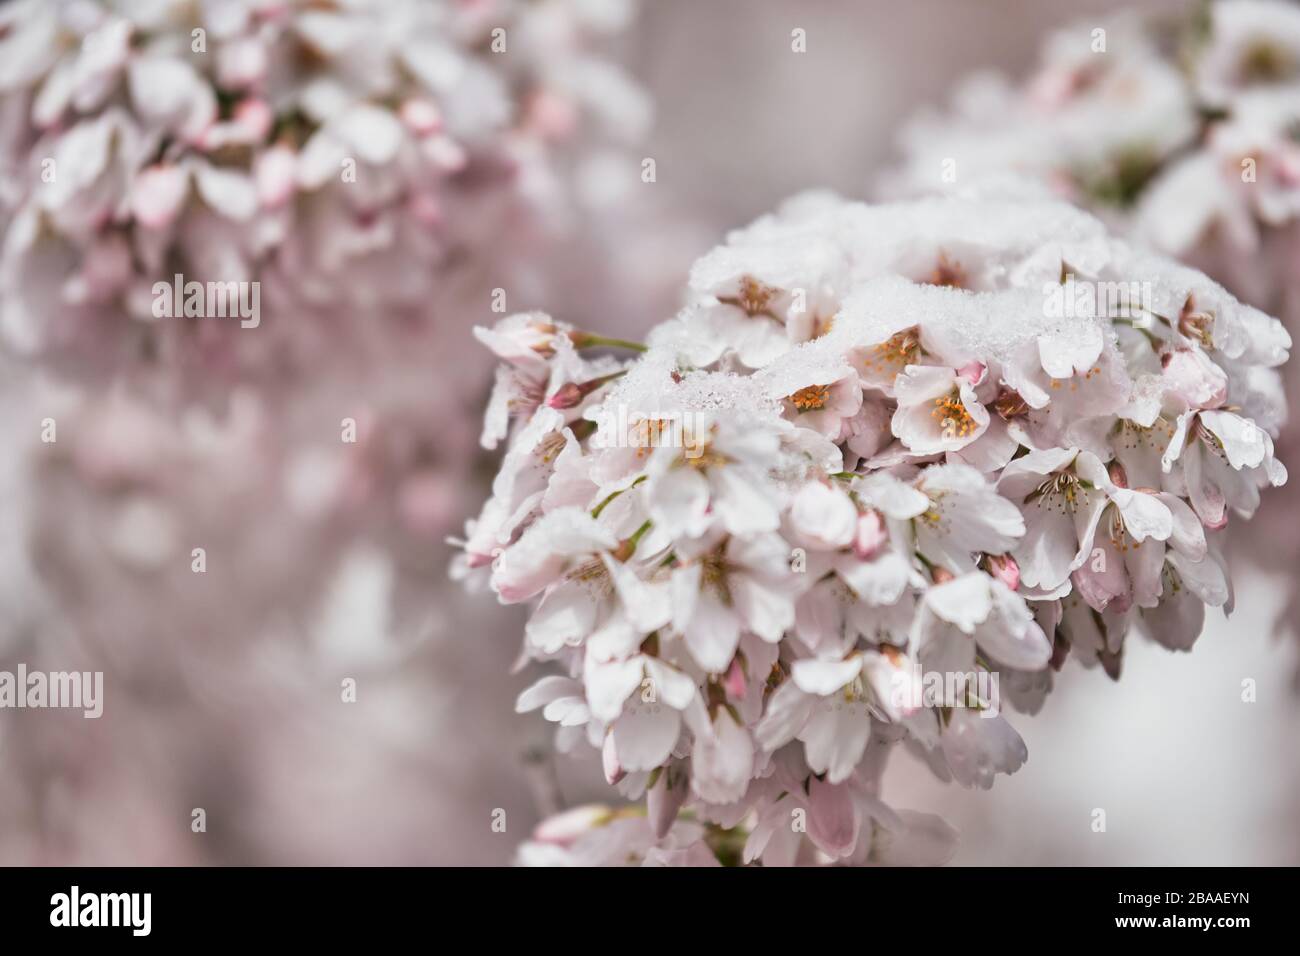 Cherry blossom flowers (Prunus Avium) and buds covered by a white snow mantle. Concept of spring, blooming, sakura festival in Japan and nature Stock Photo